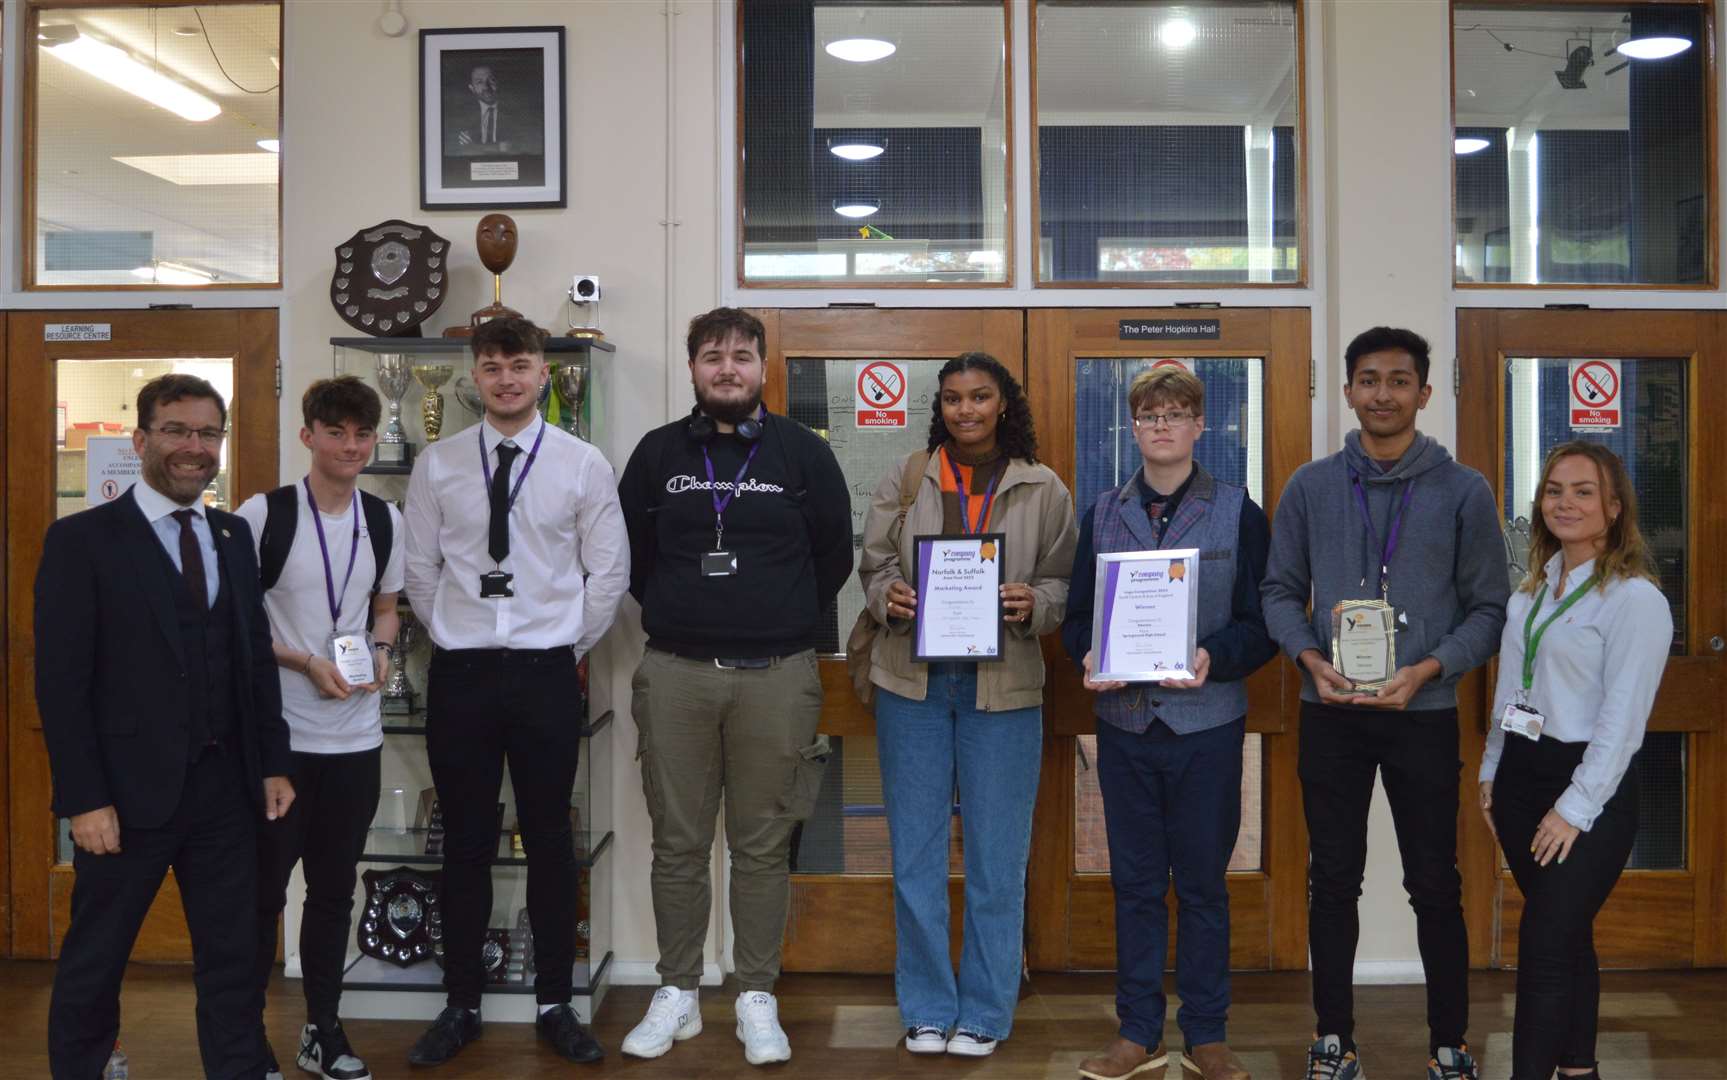 Students at Springwood High School took part in the Young Enterprise Programme